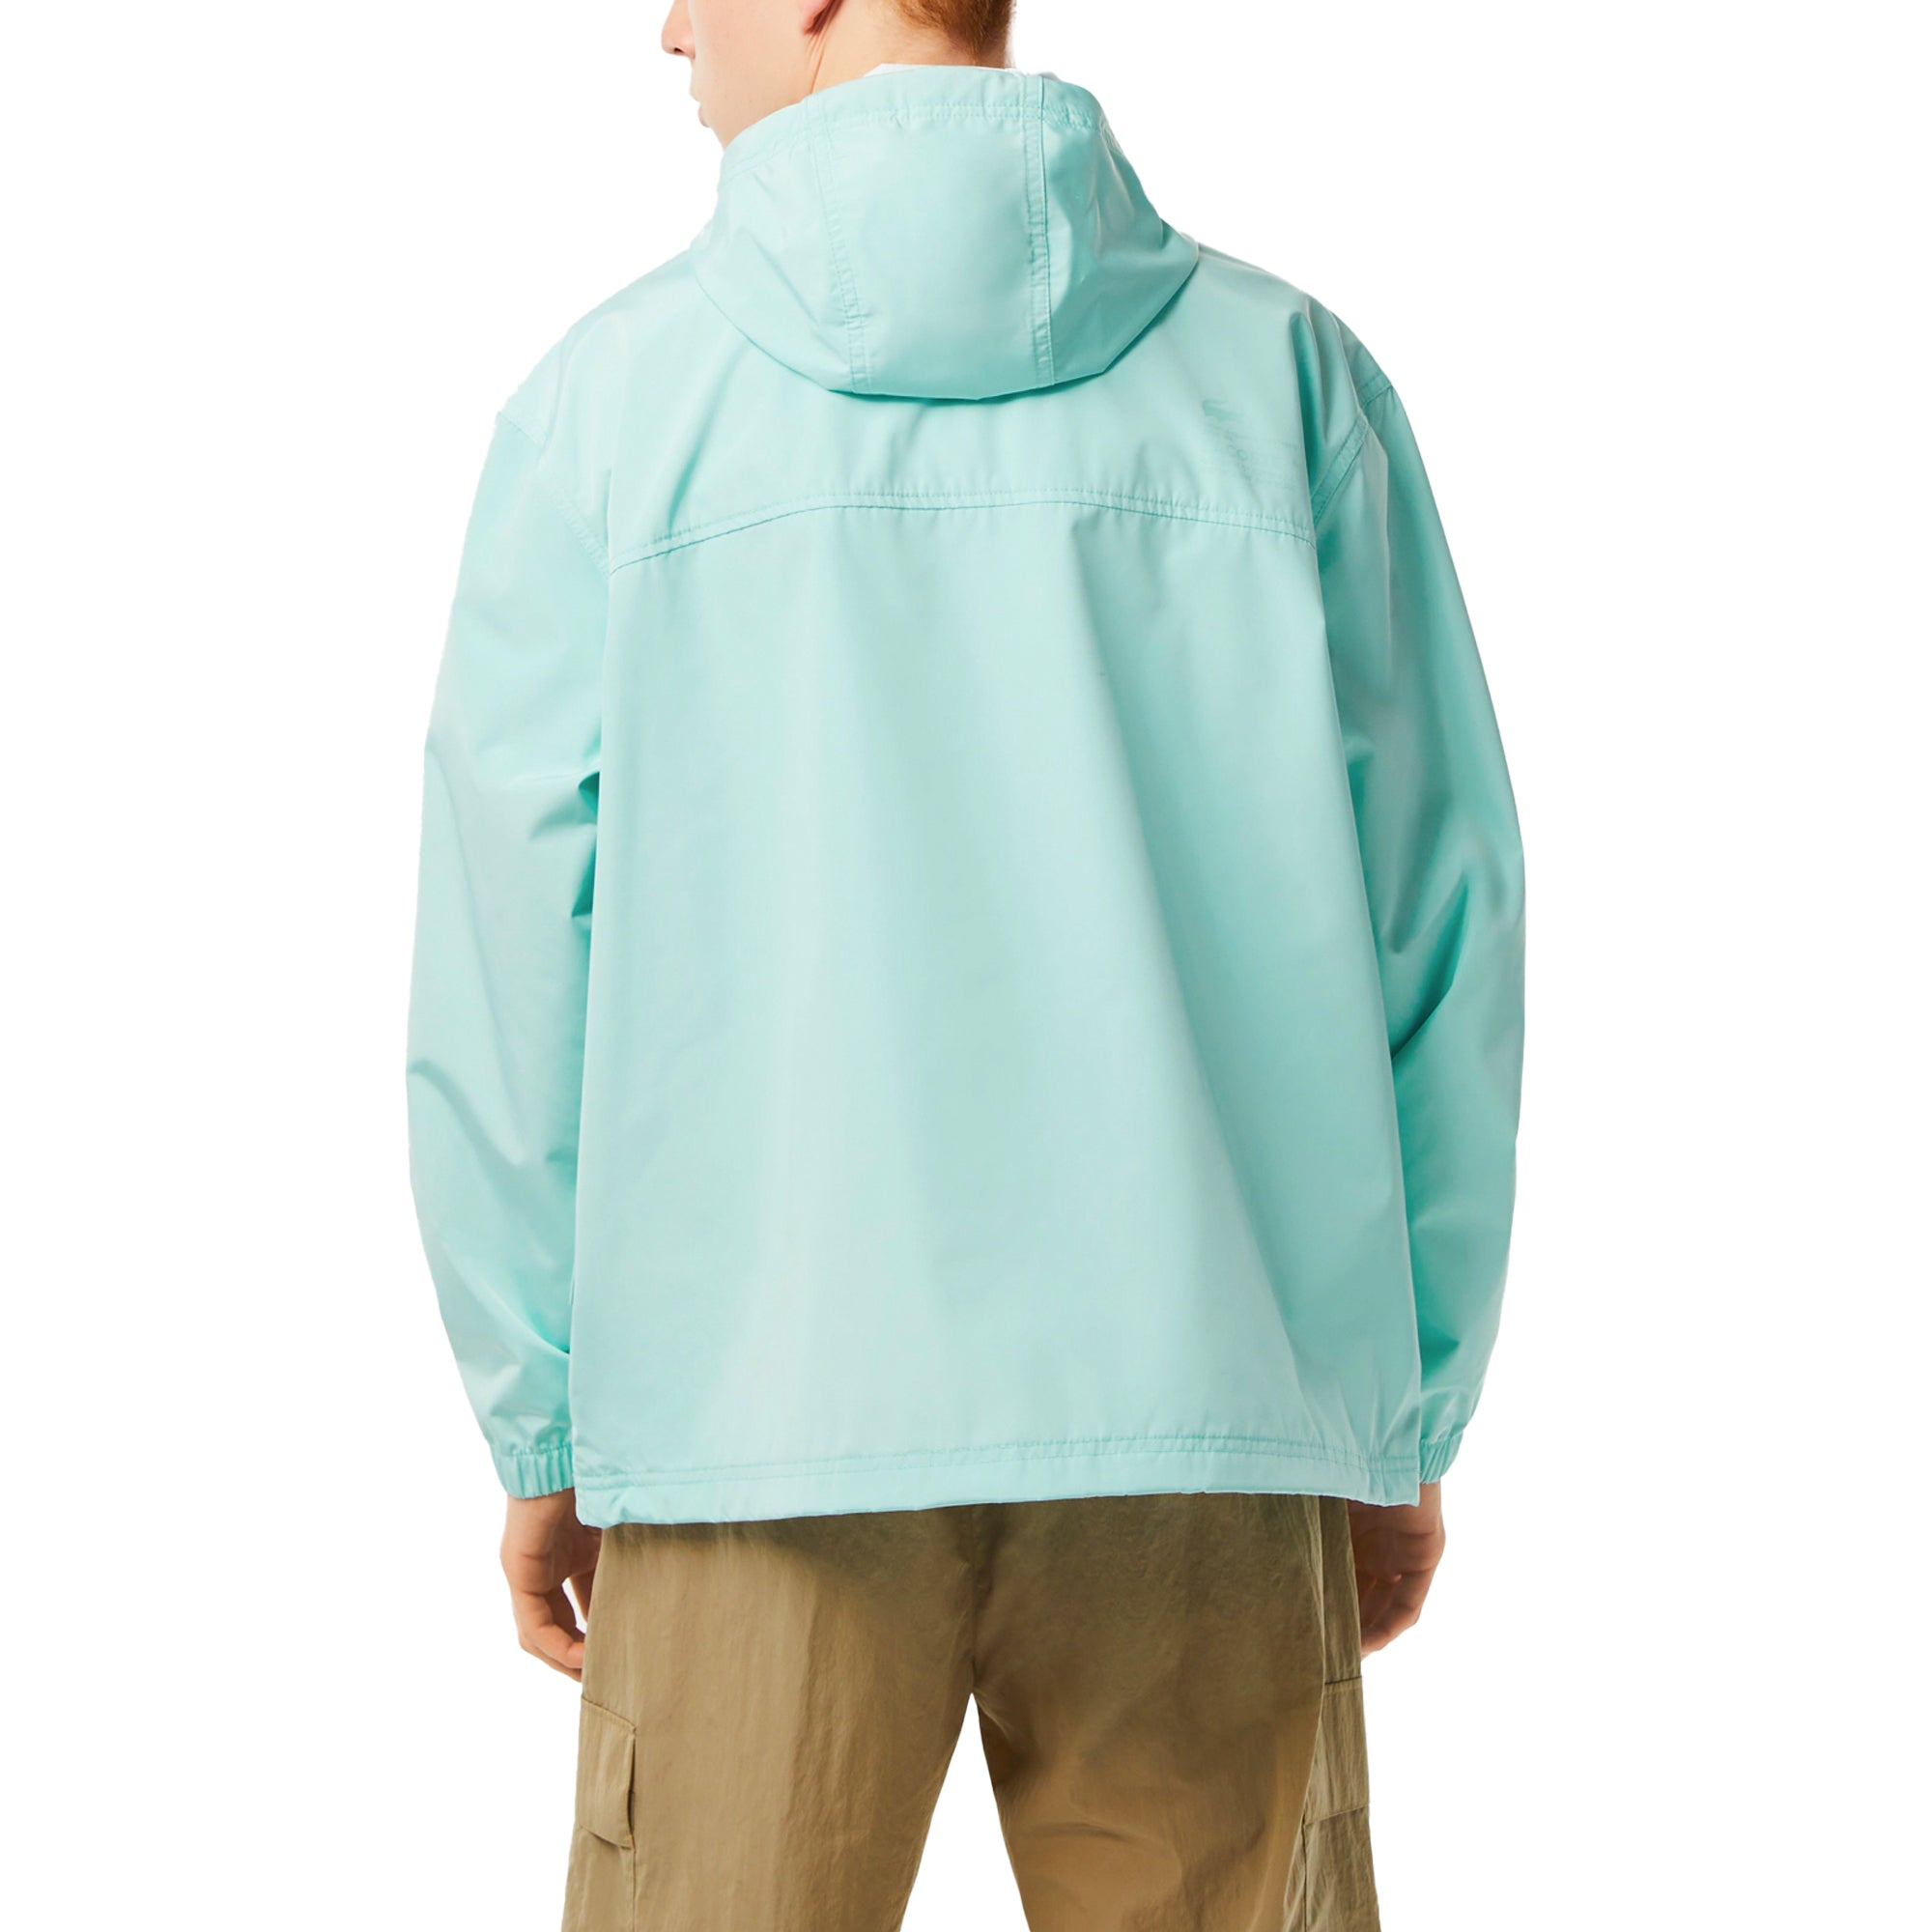 Lacoste BH5386 Water Repellant Smock Jacket - Pastille Mint